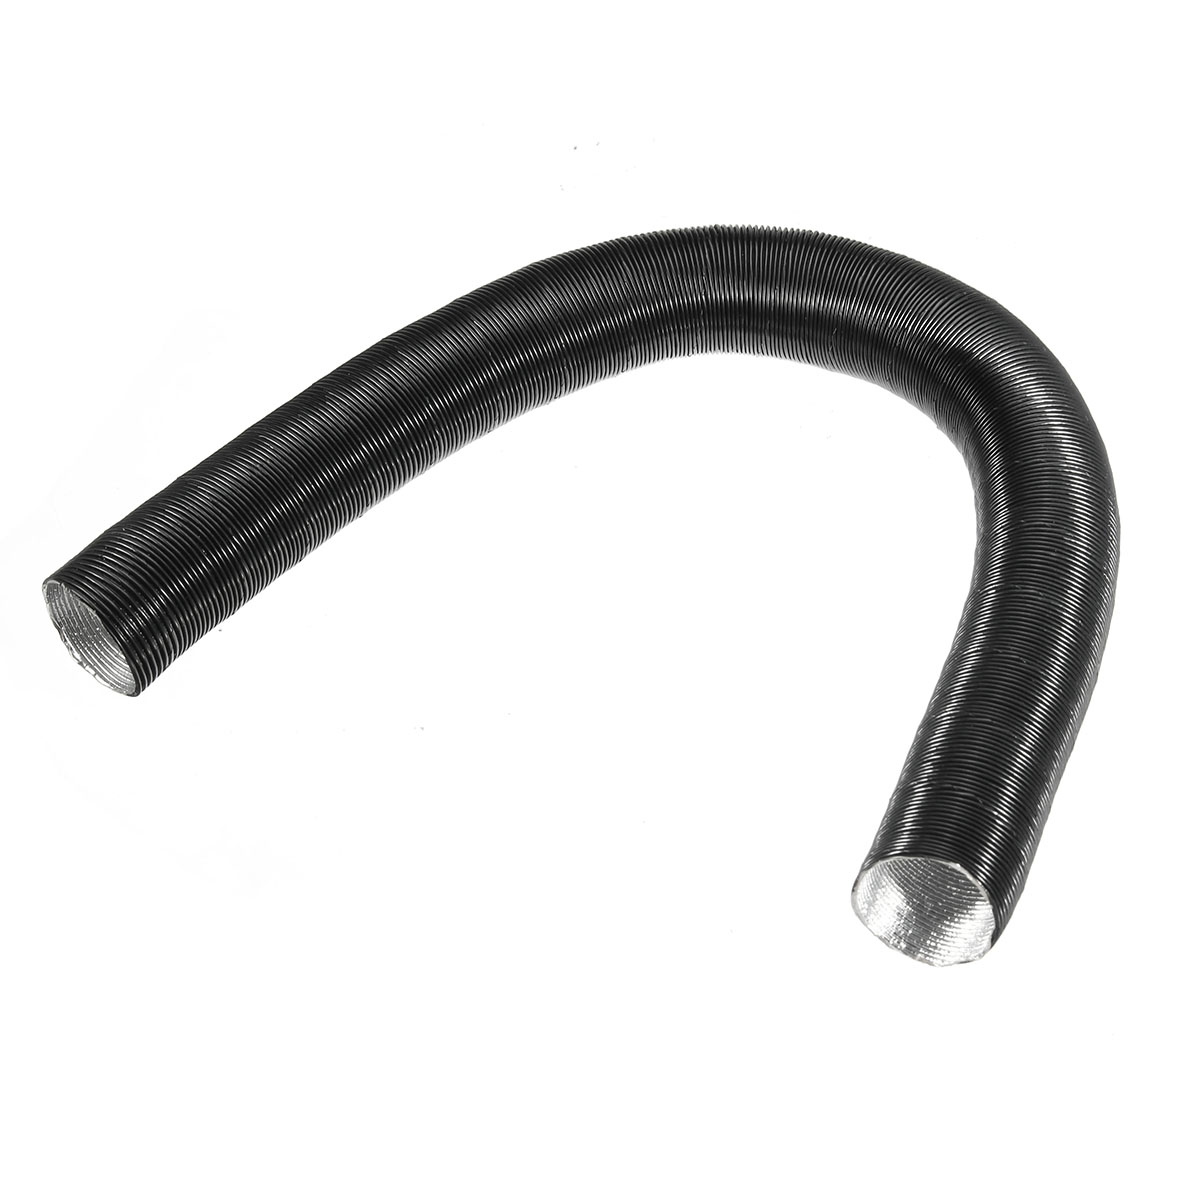 24mm-Exhaust-Silencer-25mm-Filter-Exhaust--Intake-Pipe-For-Air-Diesel-Heater-1412374-7